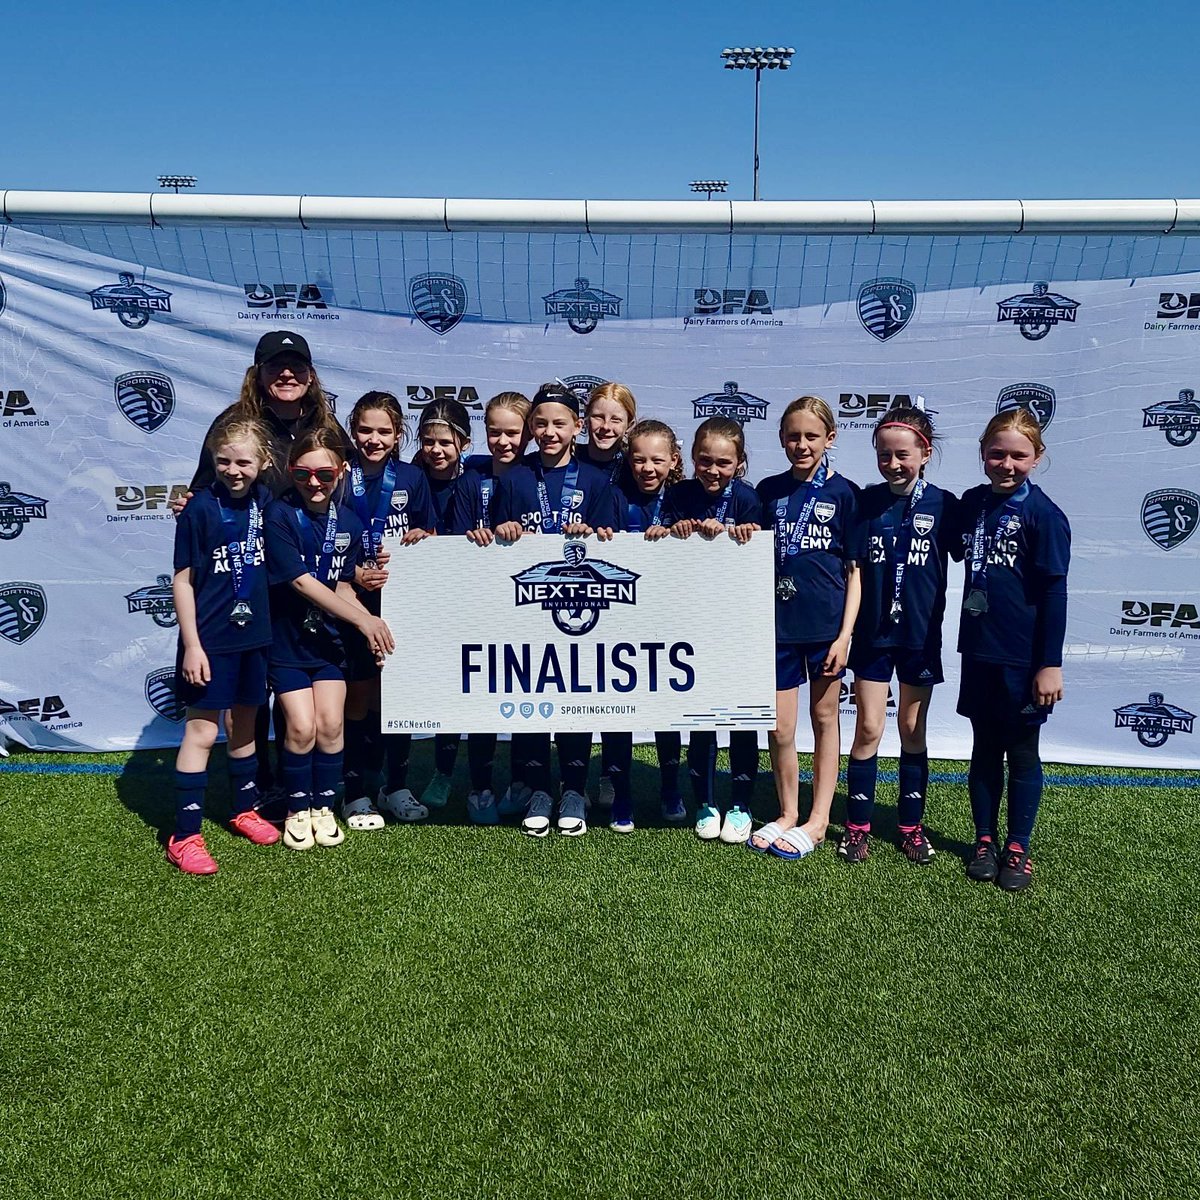 Congrats to the Academy U10 Chelsea team, finalist at the Sporting KC Nex-Gen Tournament! Way to go ladies!!